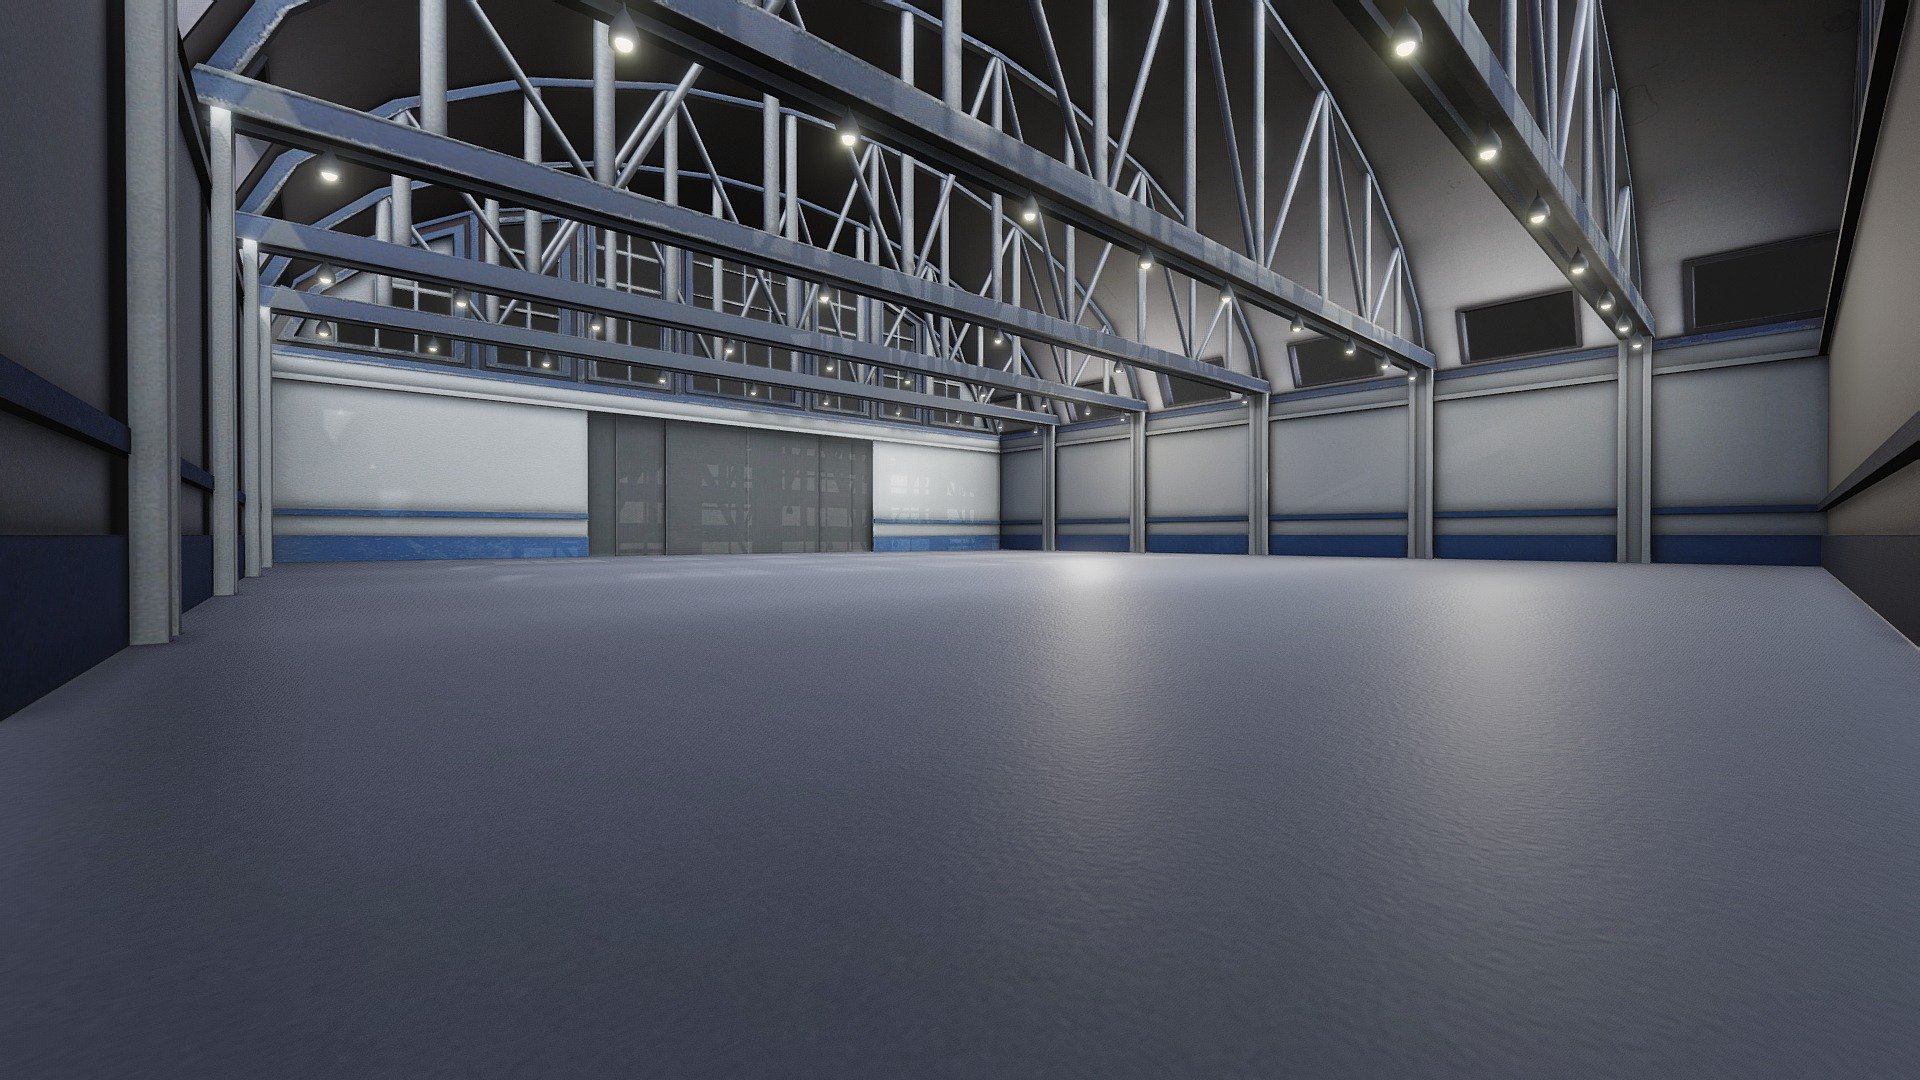 Realistic Industrial Building (VR/VX) (Model Low Poly) Textures Diffuse Textures Normal Textures self-illuminated

Create by Aaron3D: aarontresdesero@gmail.com - Realistic Industrial Building (VR/VX) - Buy Royalty Free 3D model by Aaron3D (@Aarontresde) 3d model